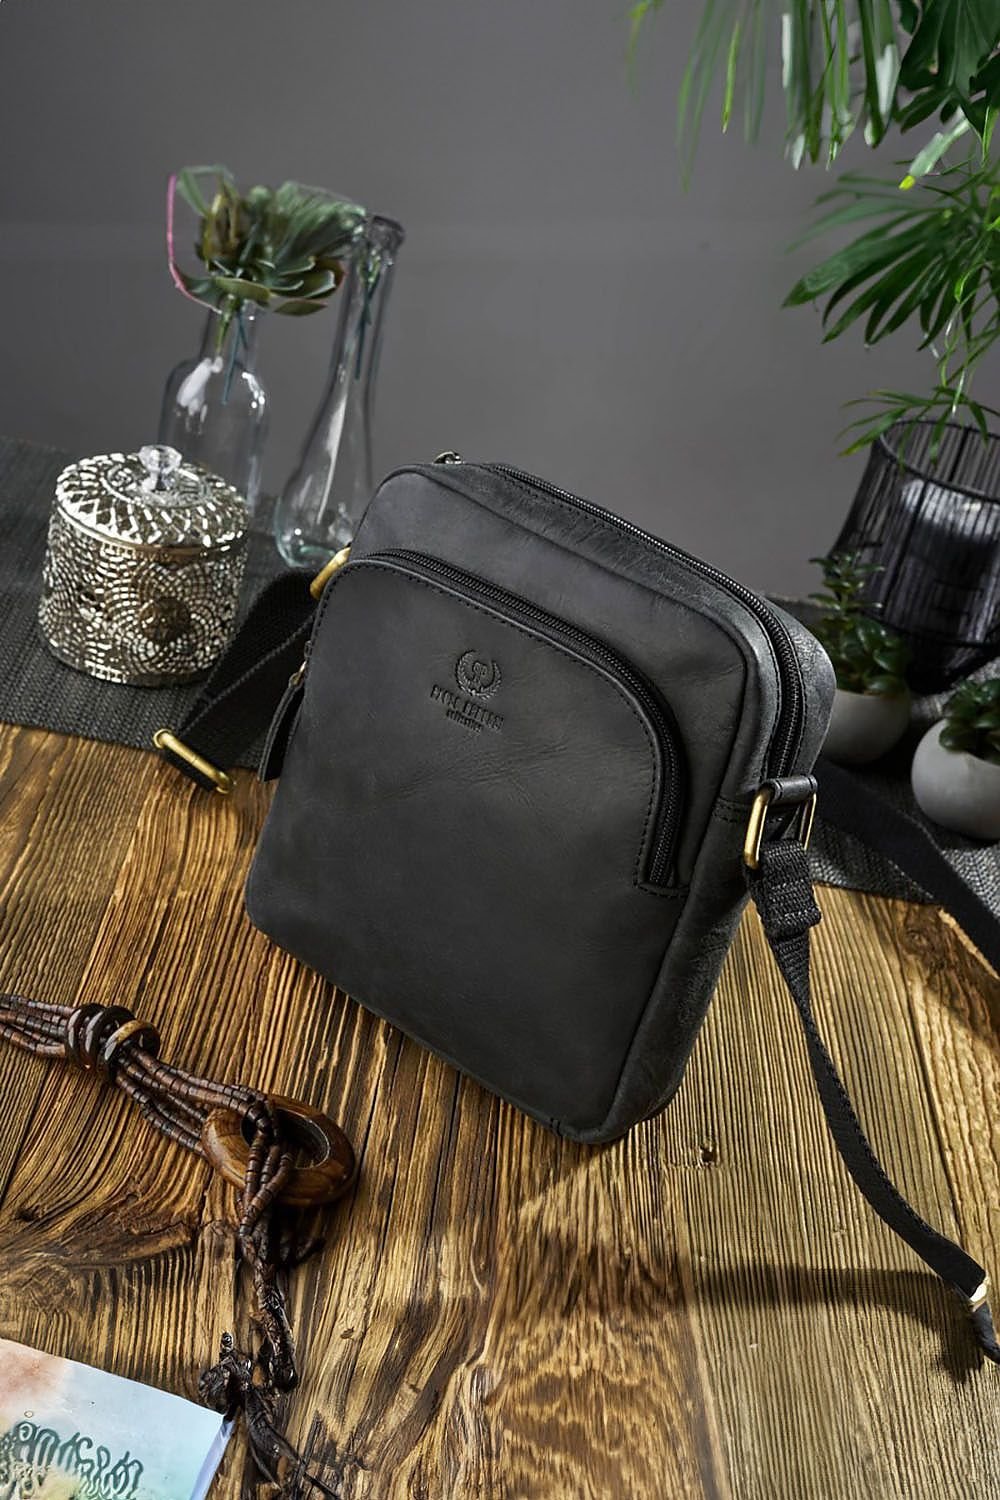 Bad AZZ Natural leather bag by Galanter, will make you smile